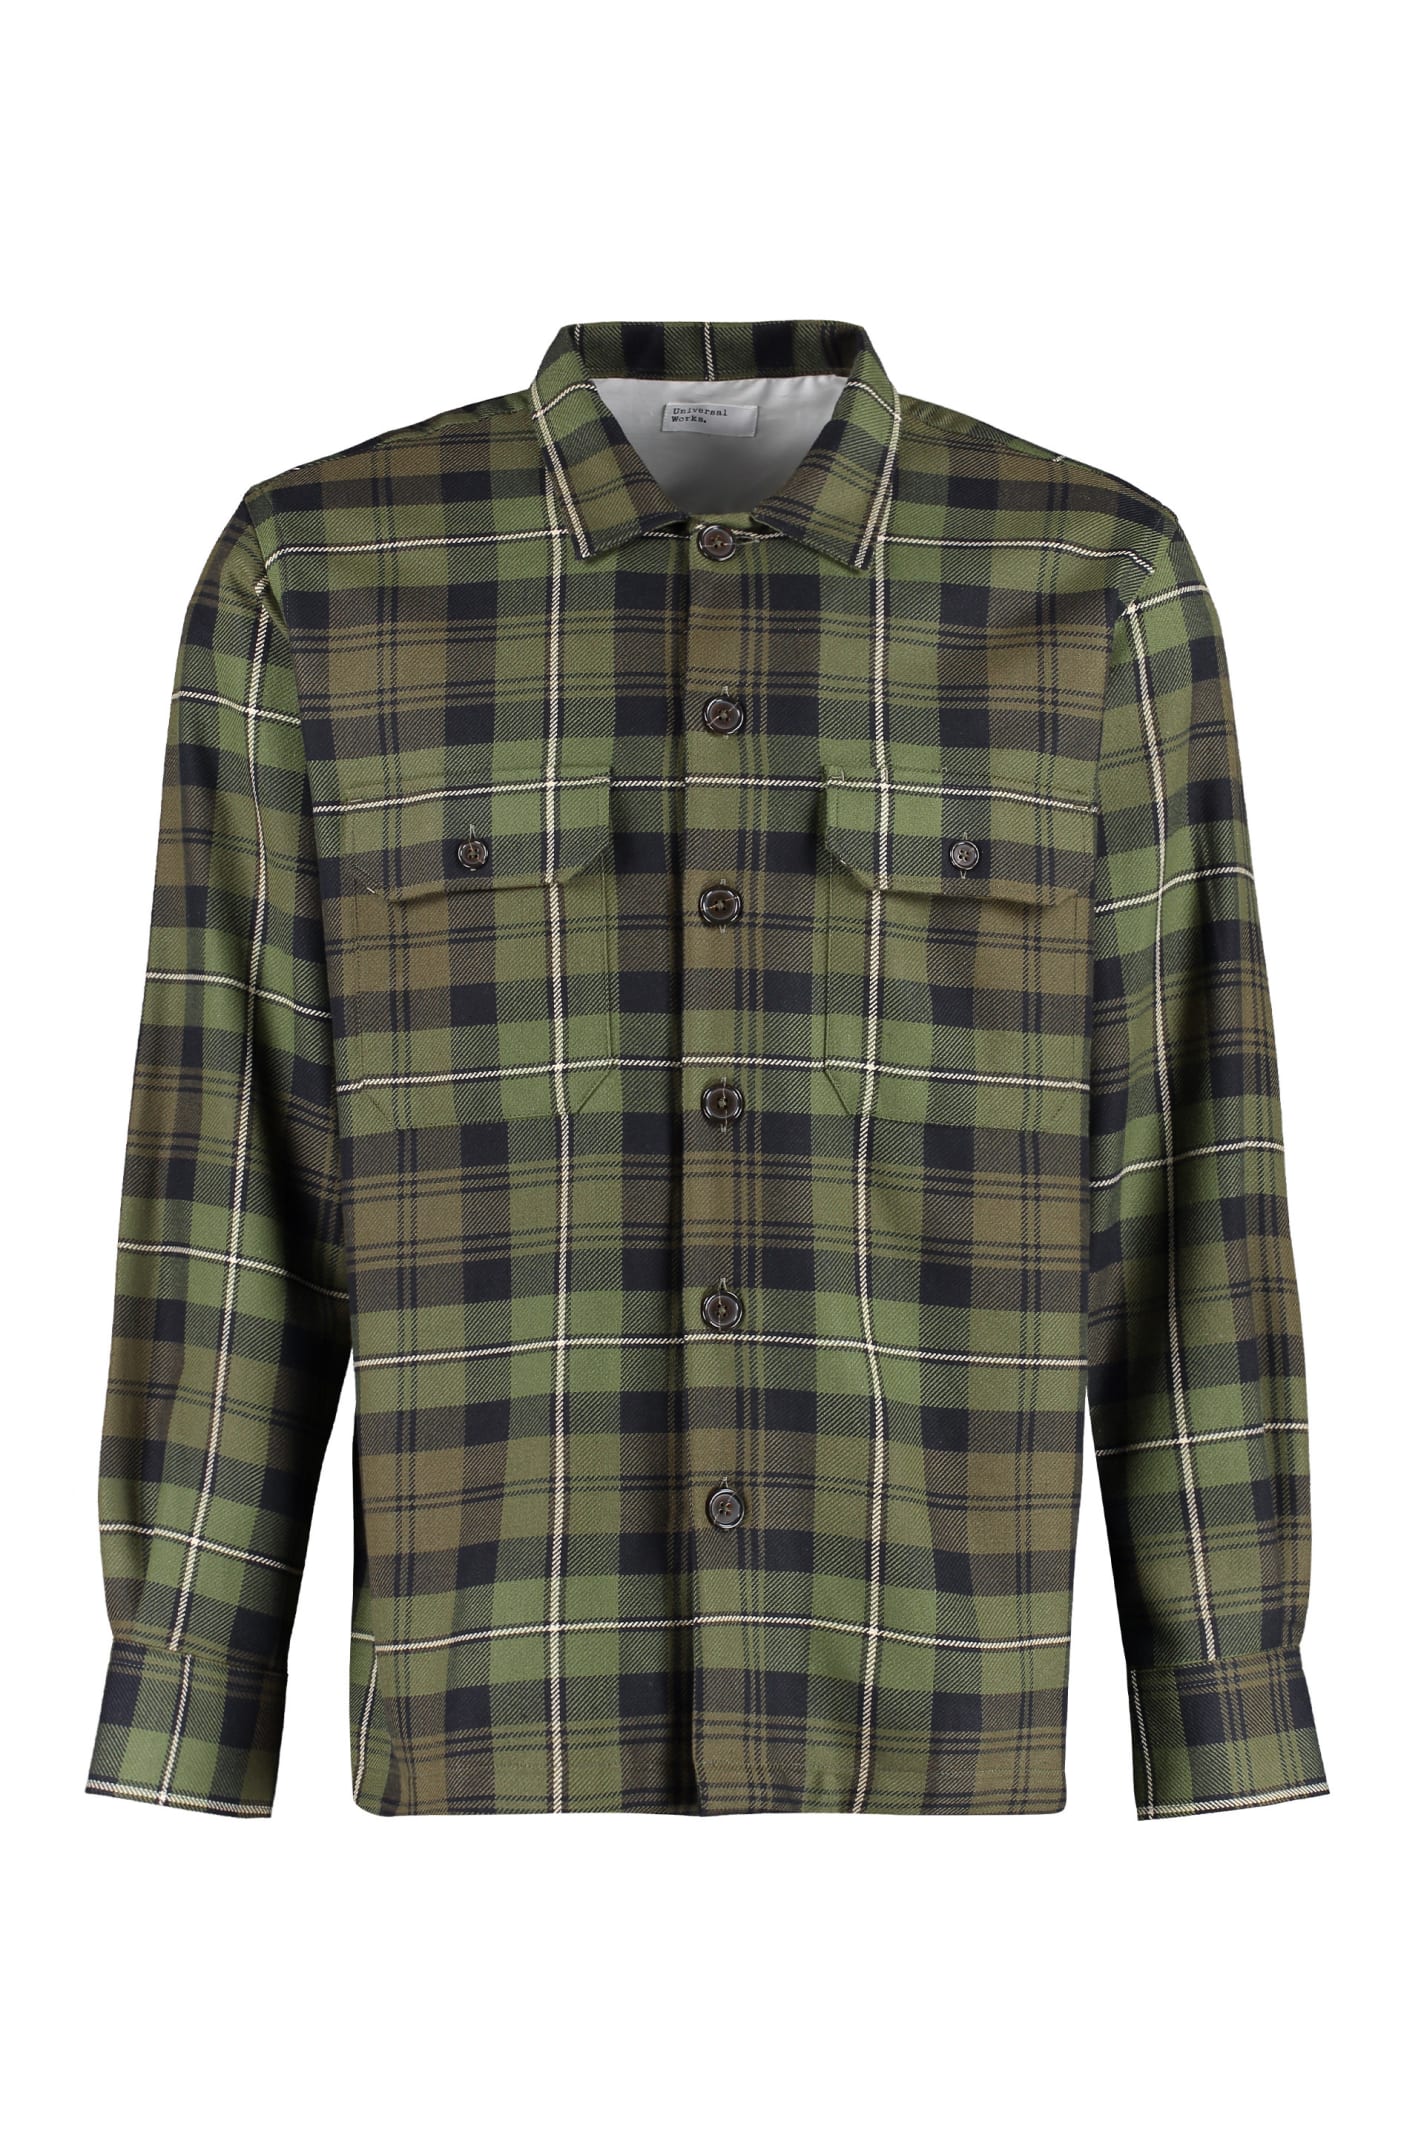 Universal Works Front Buttons Cotton Shirt